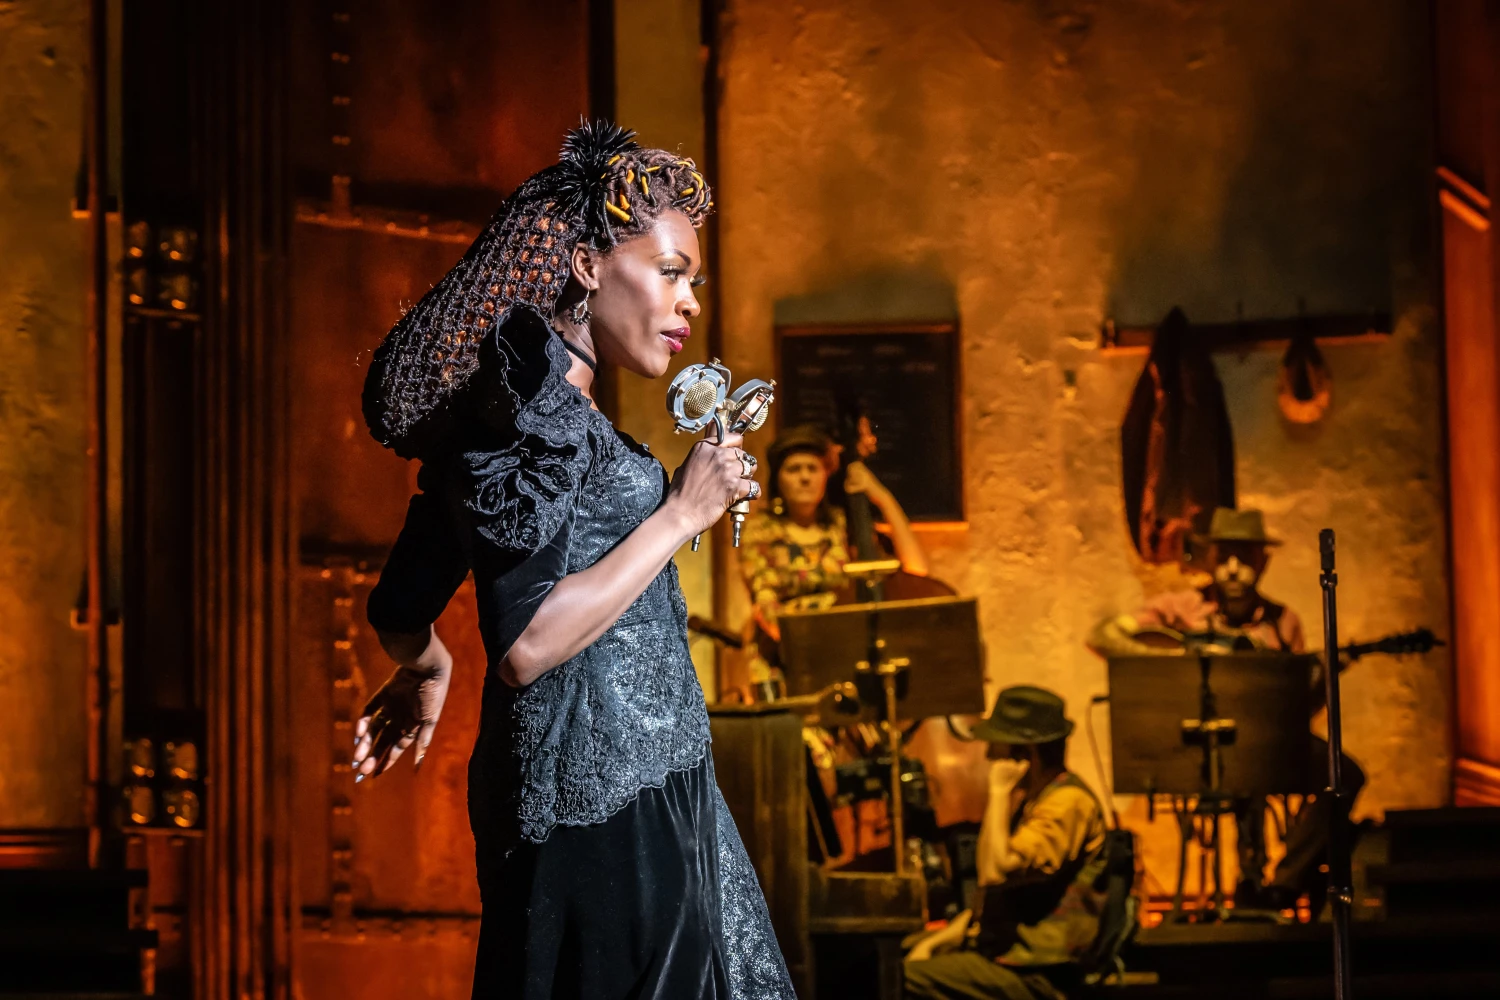 Hadestown: What to expect - 2